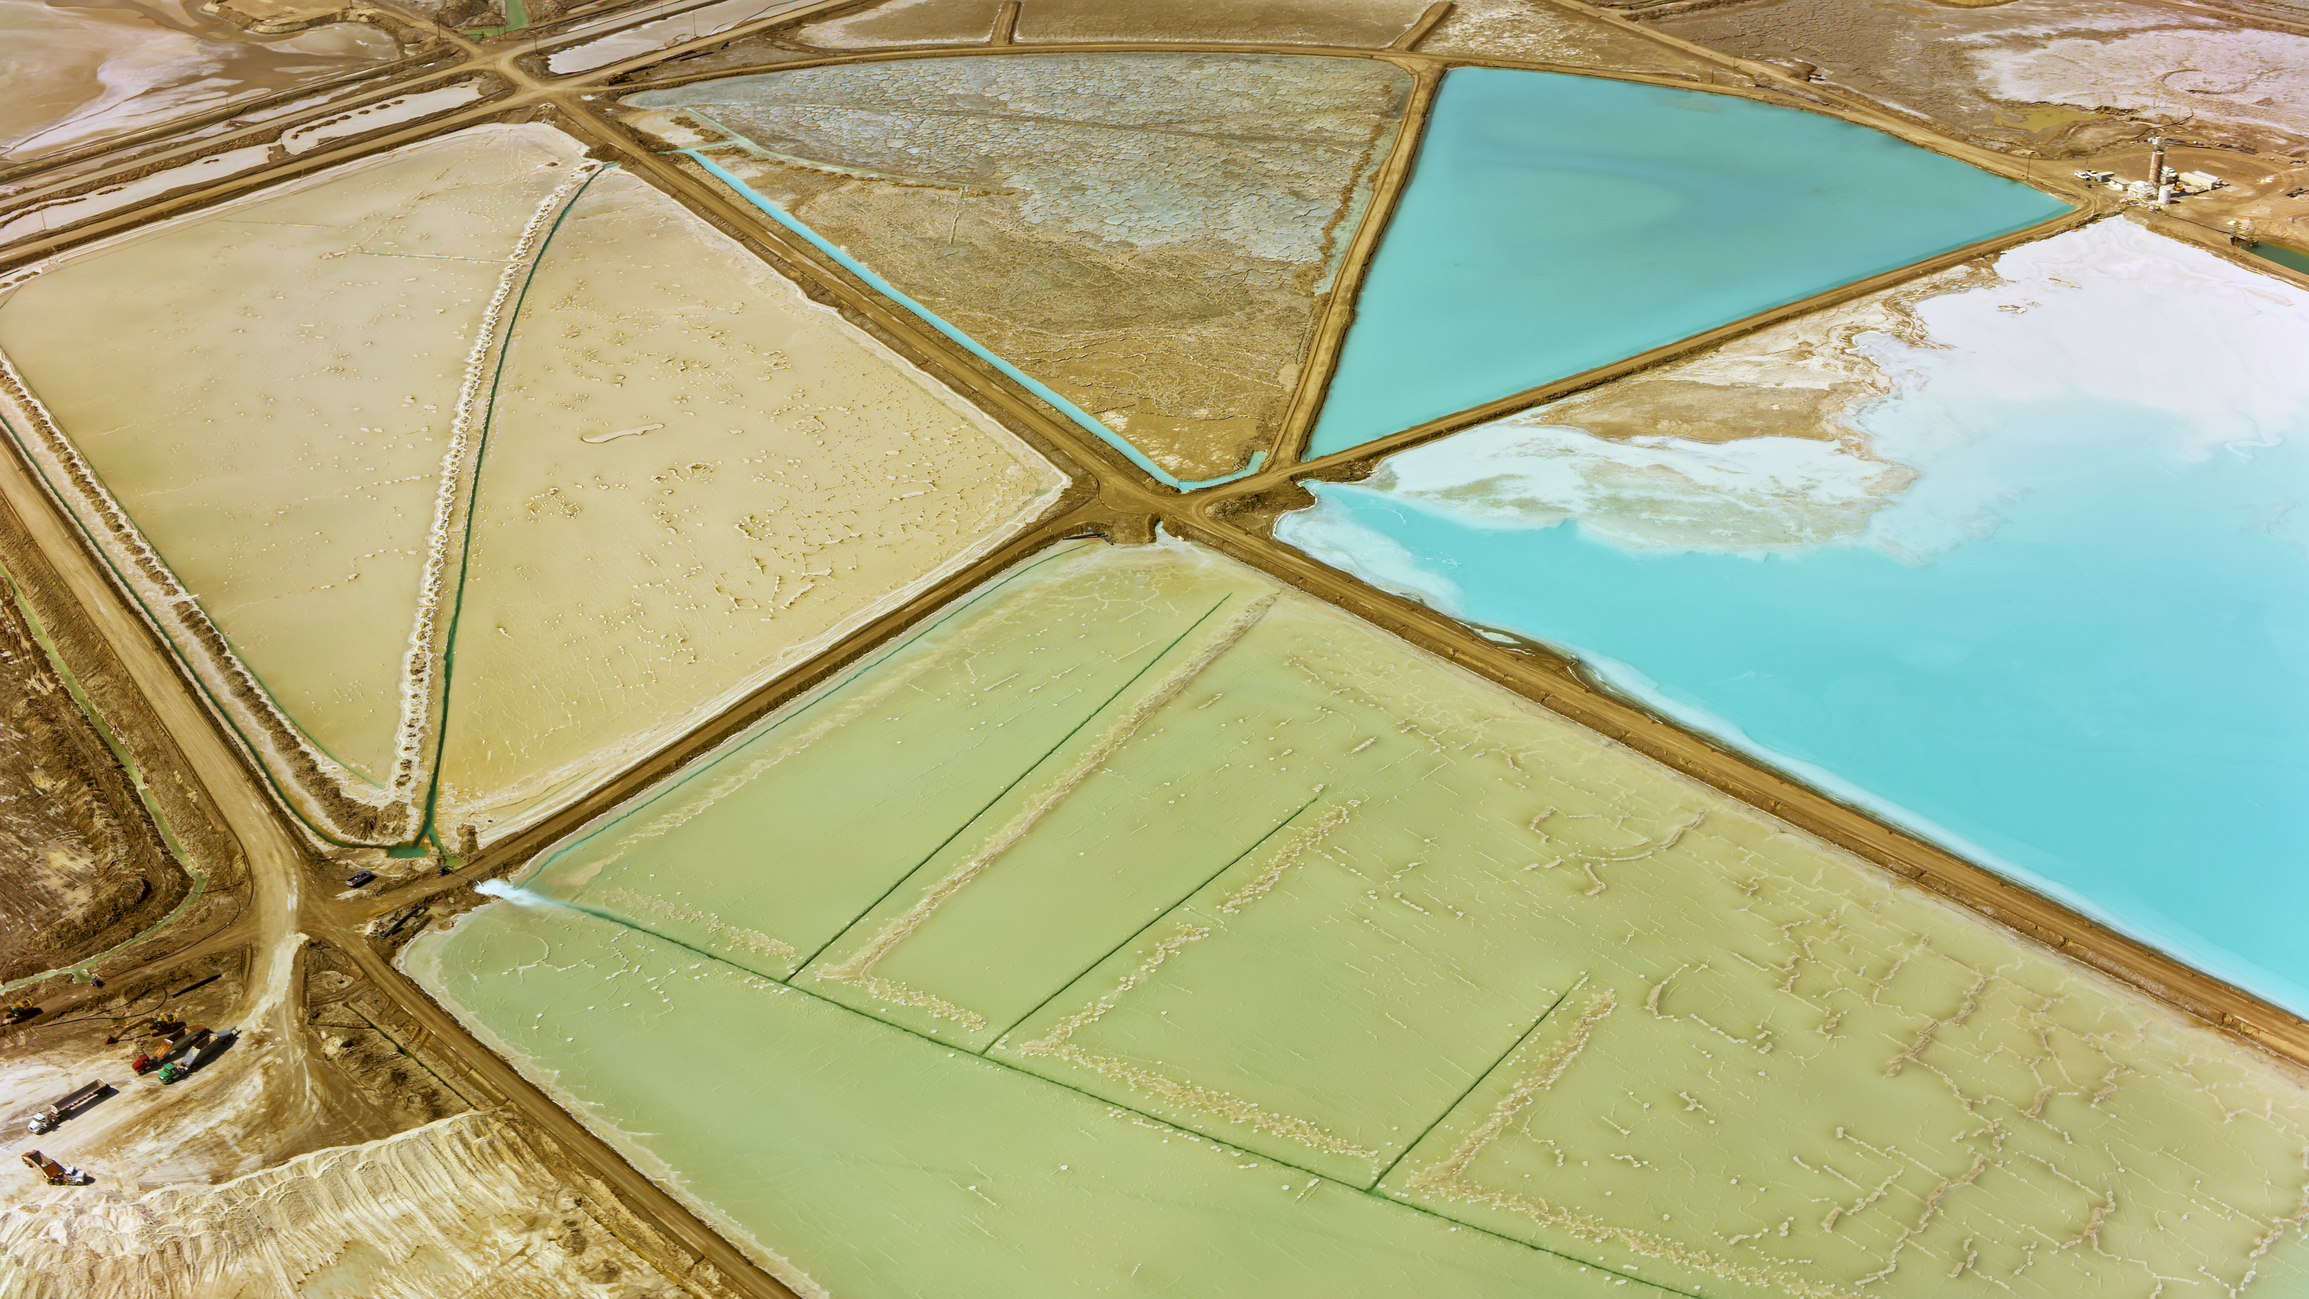 Aerial view of turquoise coloured pools at Silver Peak Lithium Mine, Nevada, California, USA.